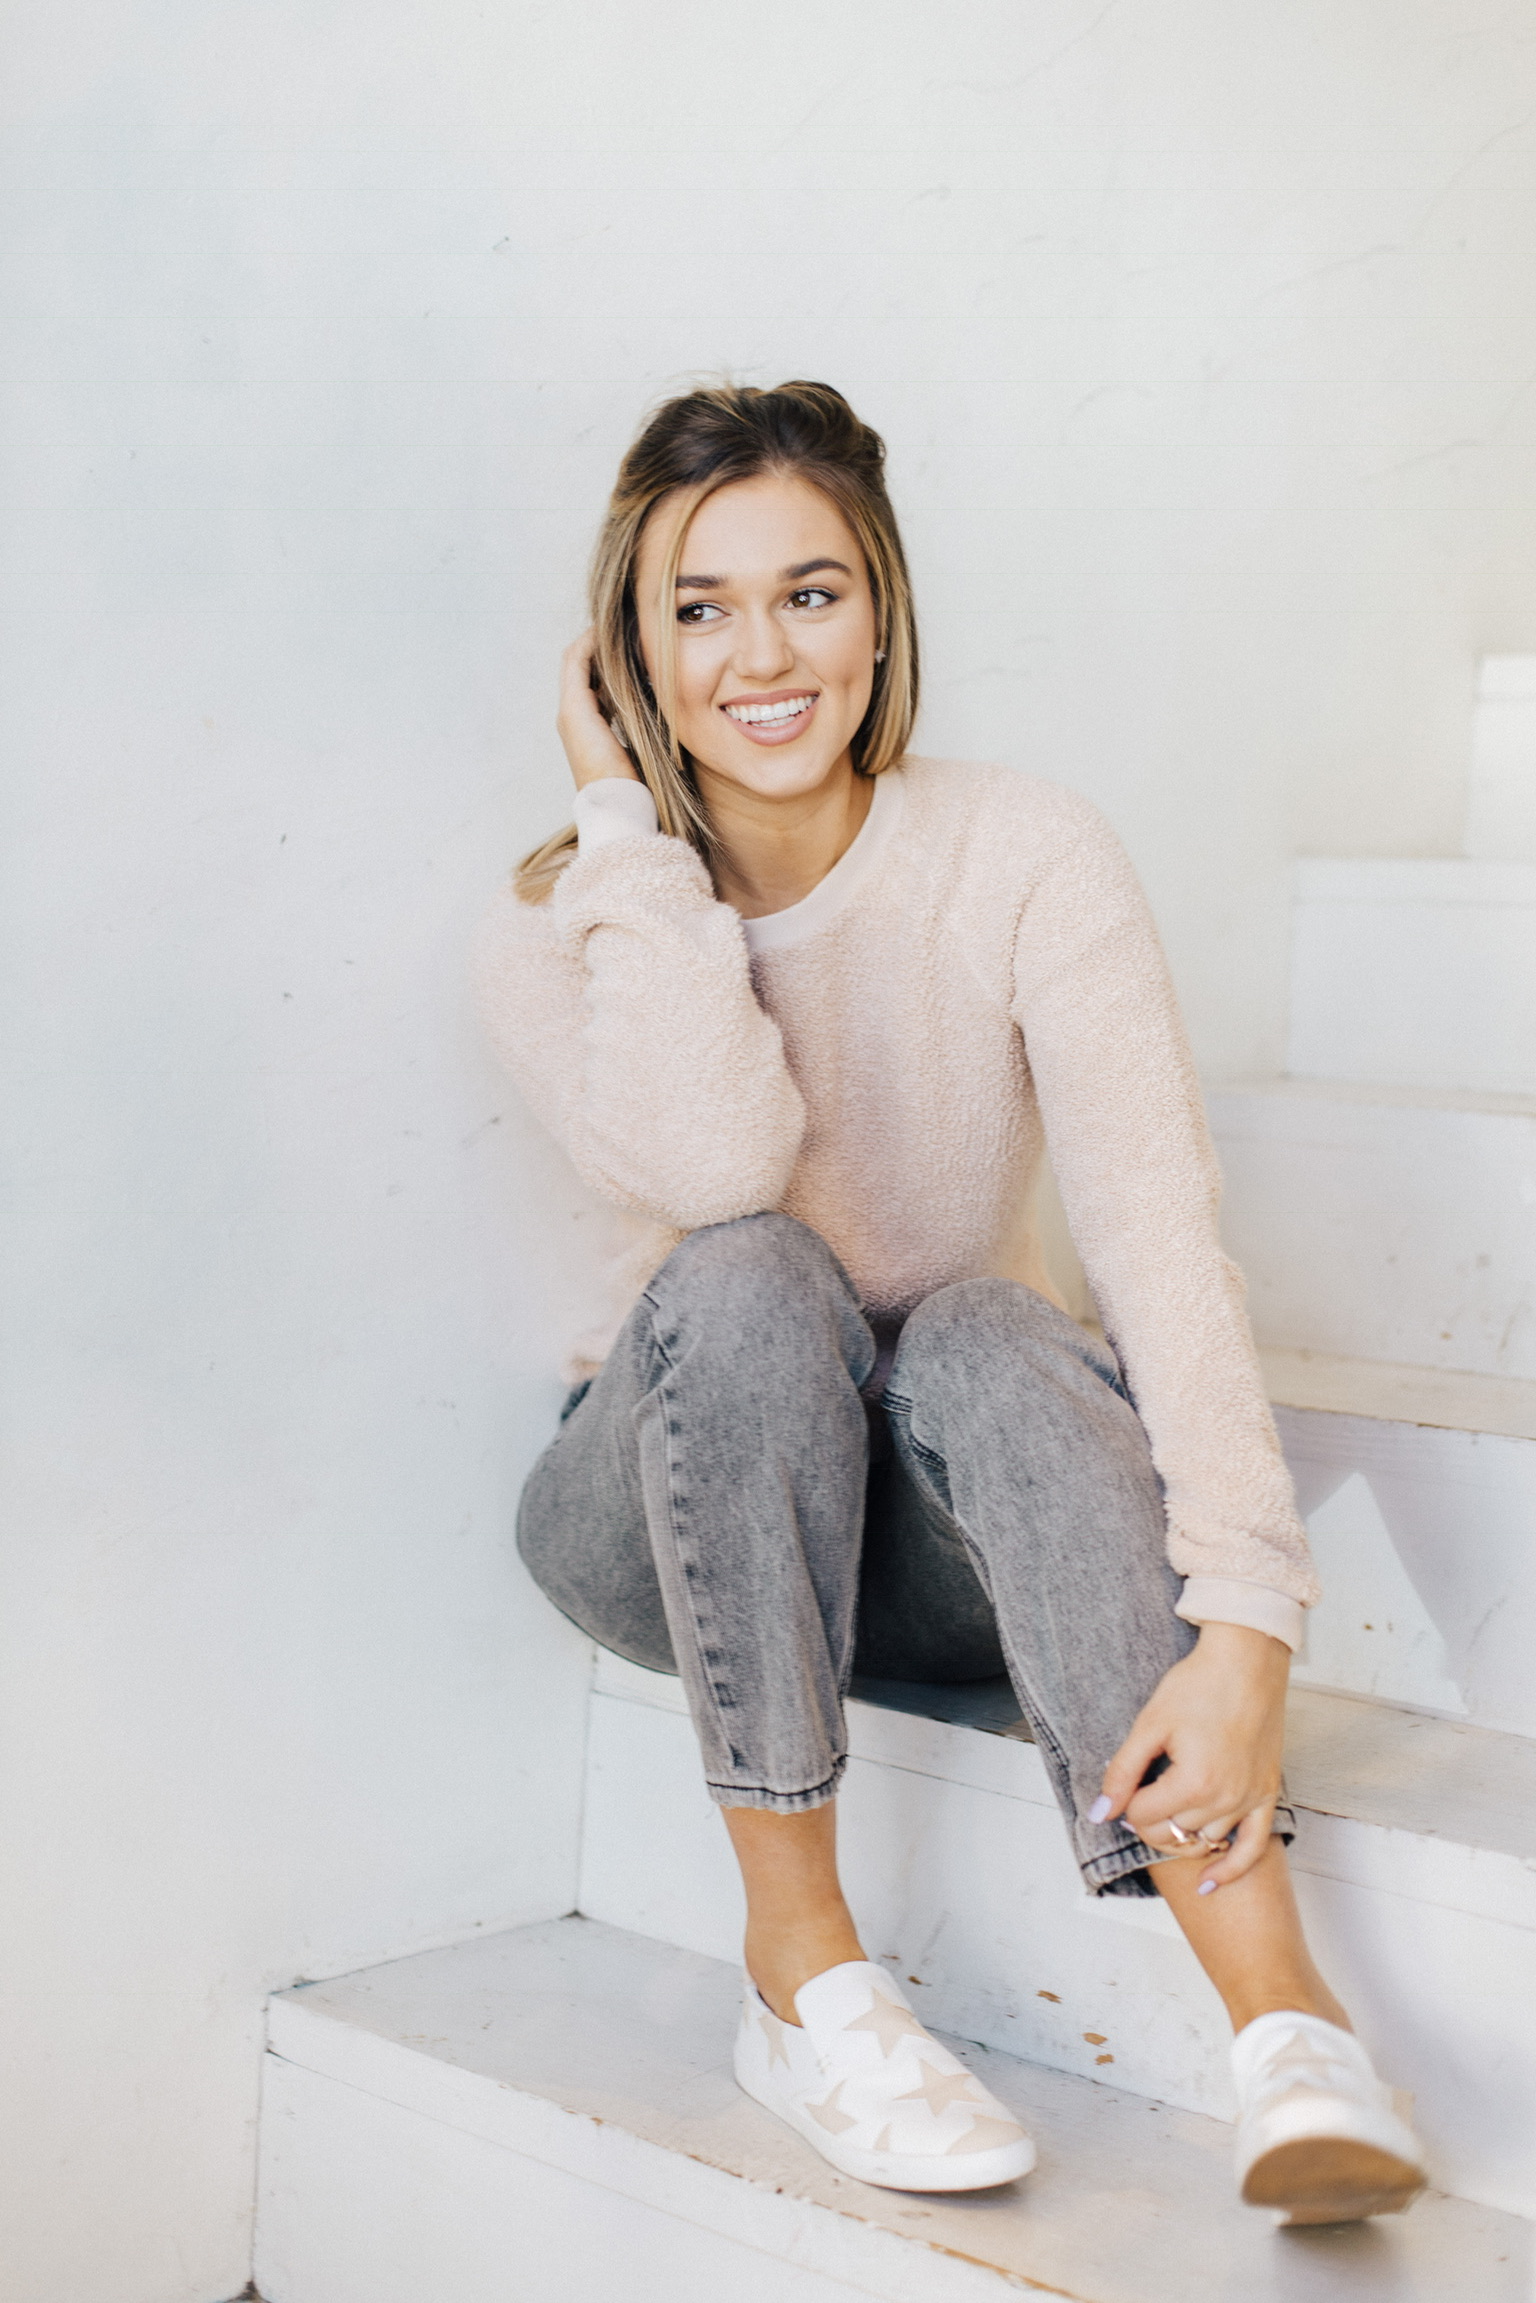 Sadie Robertson Speaks Out About Modesty